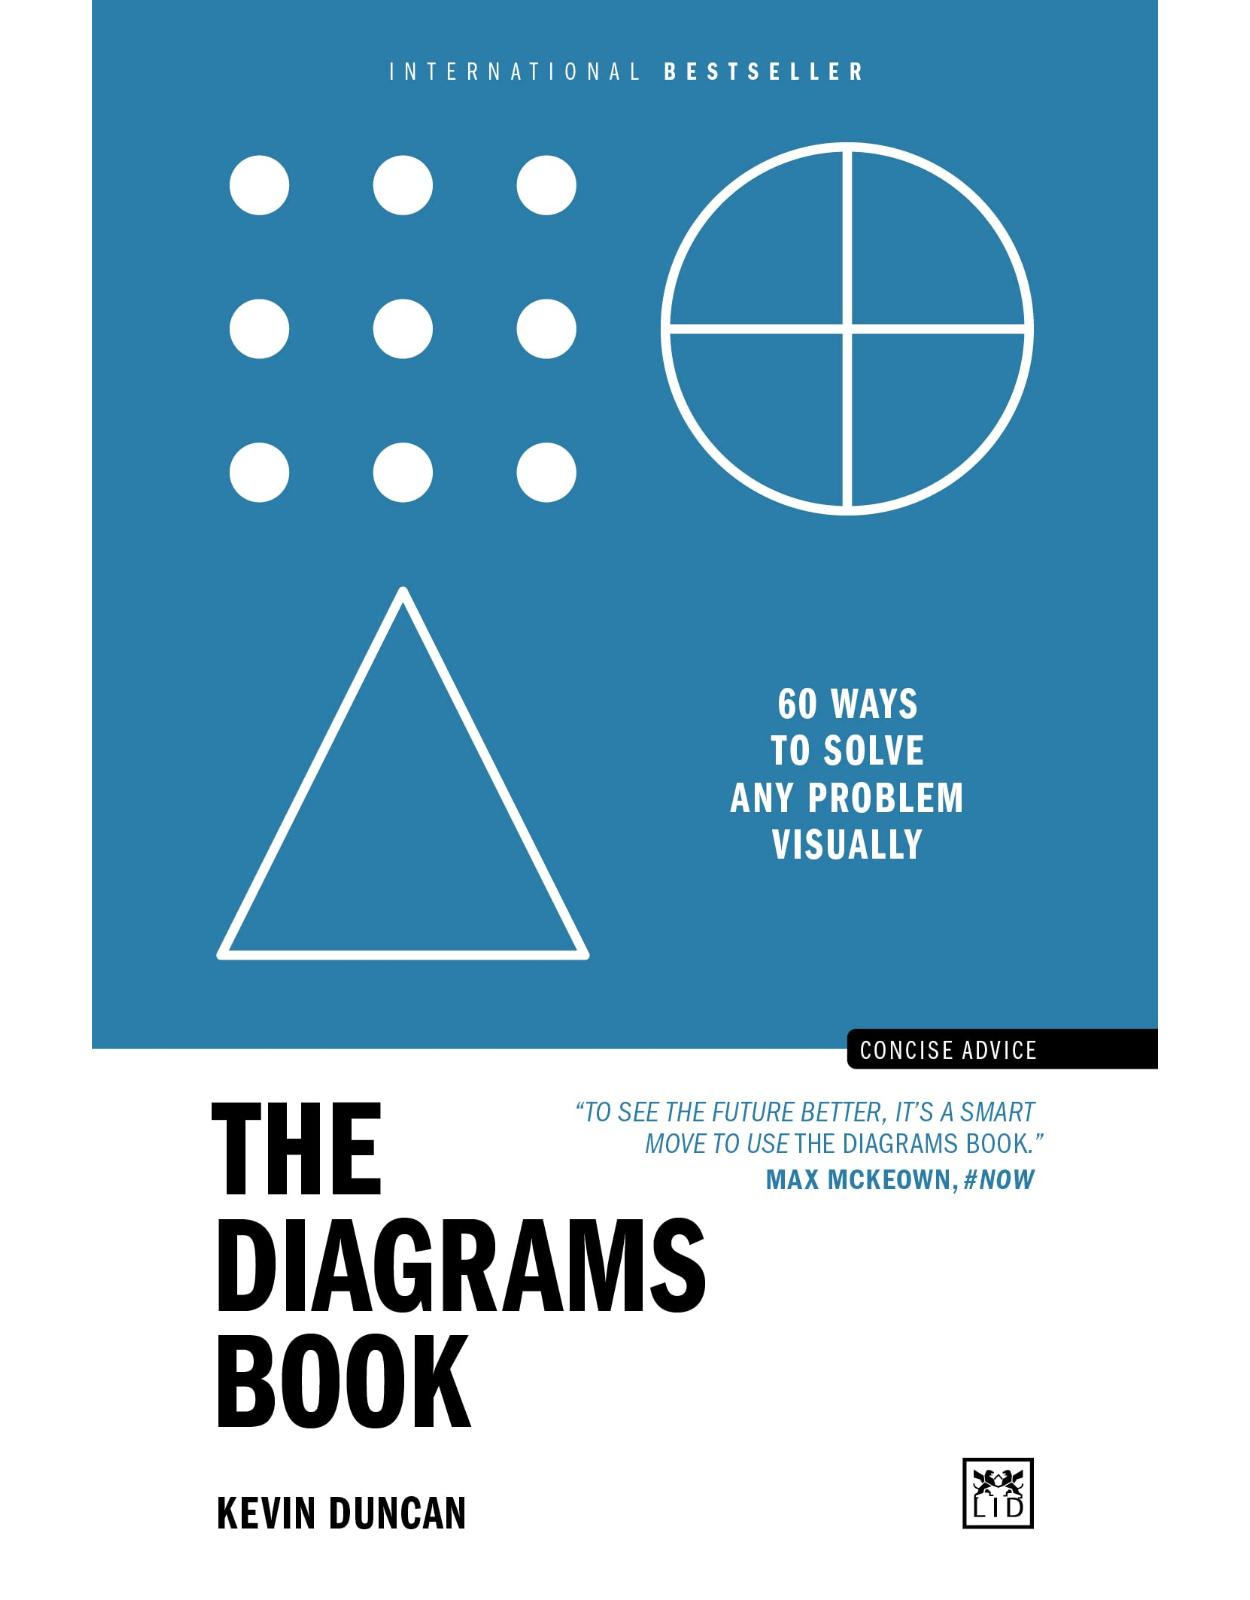 The Diagrams Book: 60 ways to solve any problem visually